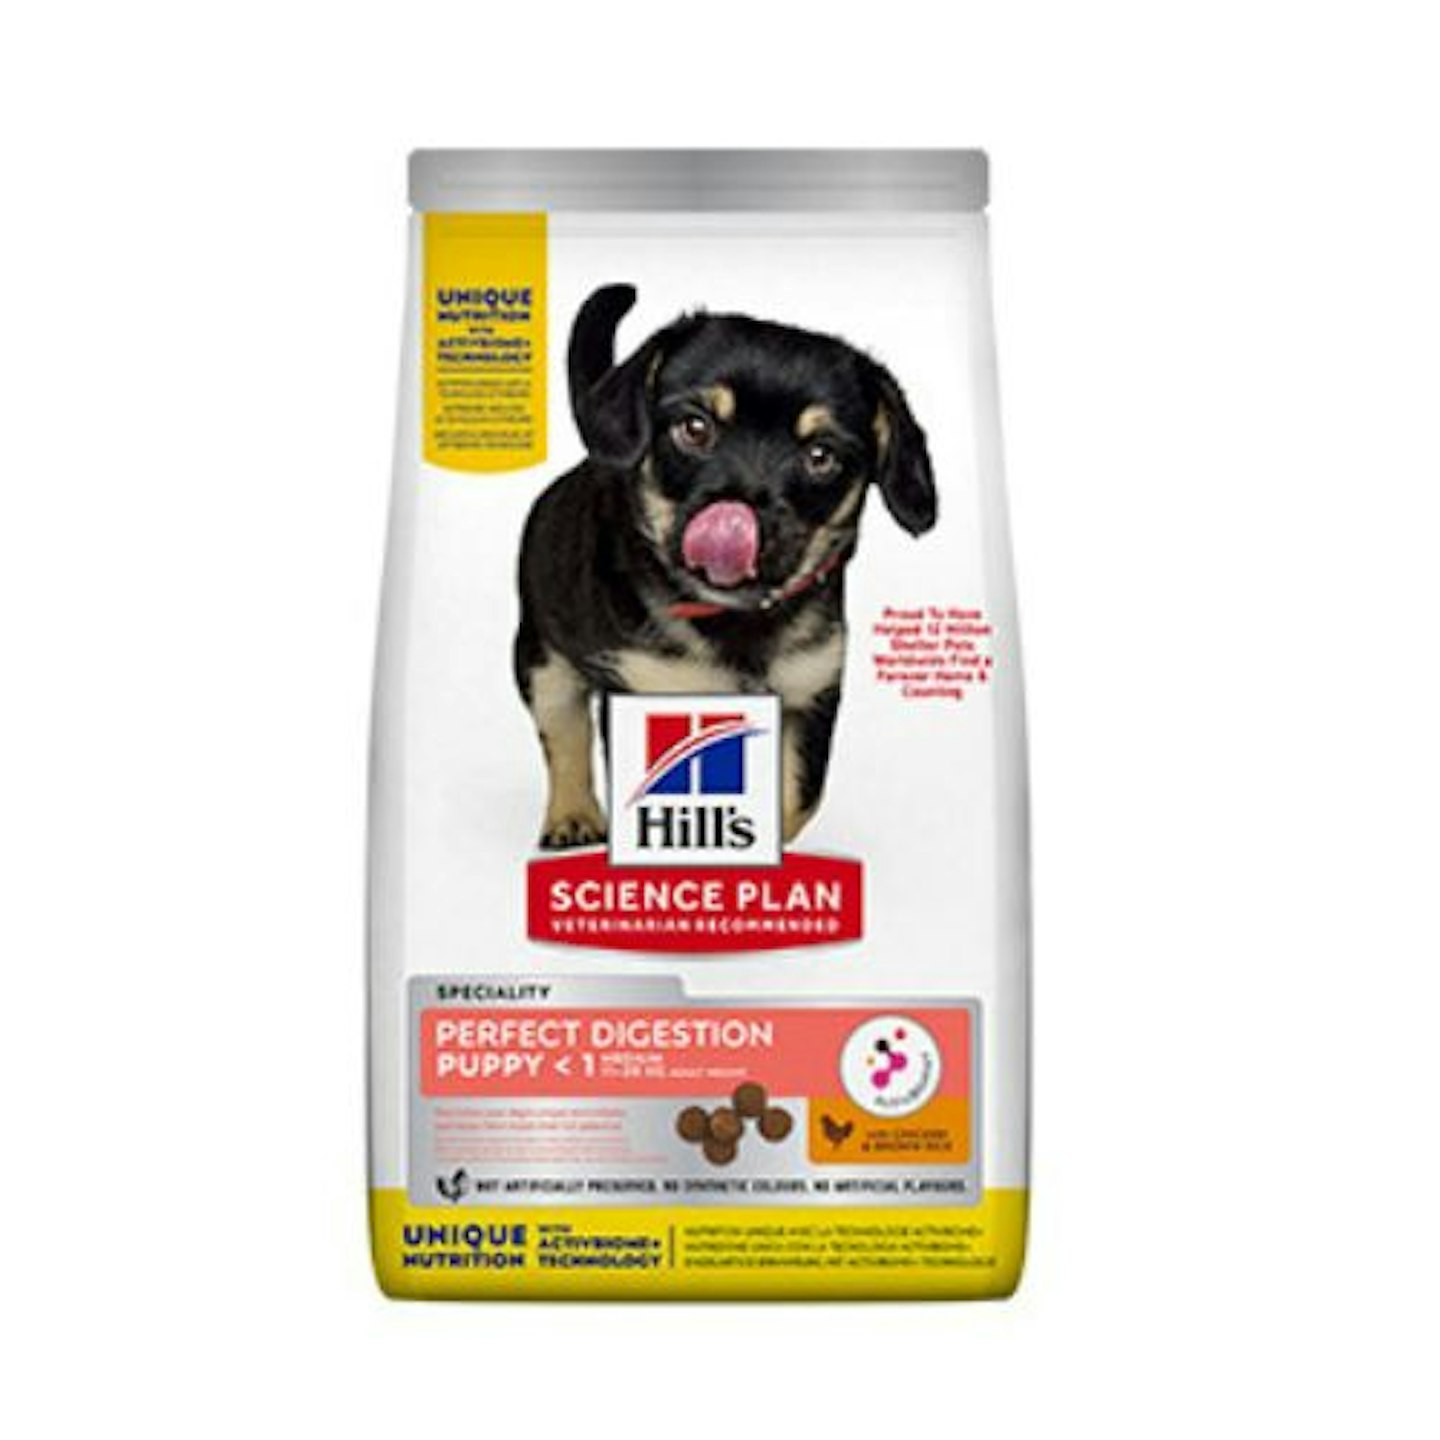 Hill's Science Plan Perfect Digestion Medium Breed Dry Puppy Food Chicken